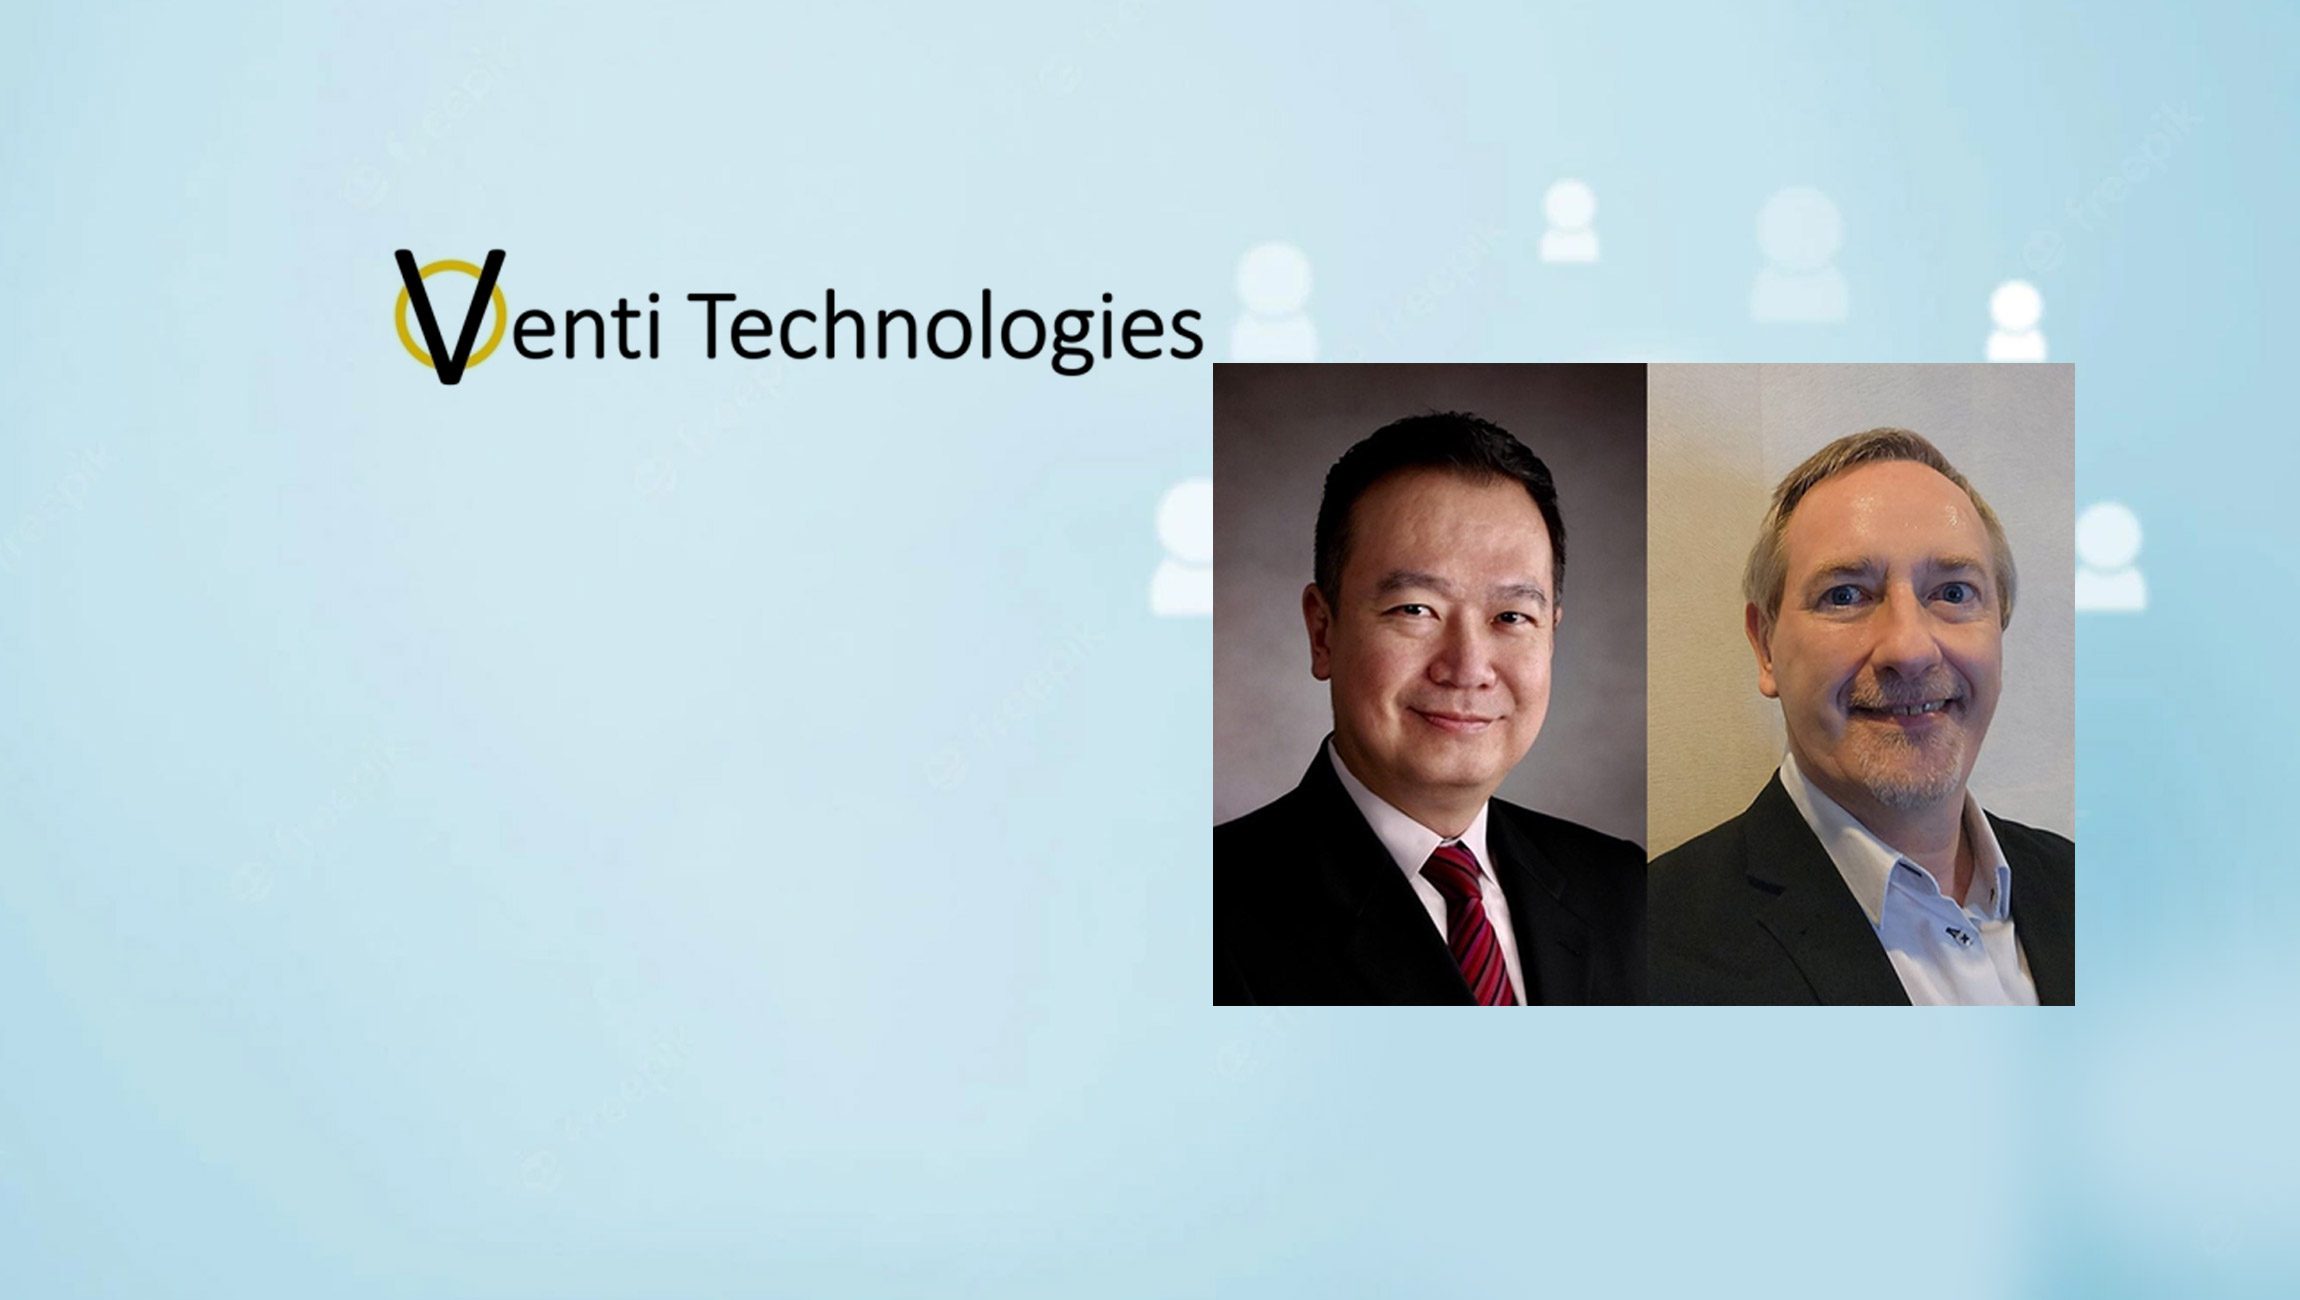 Venti Technologies Strengthens Leadership Team With Two Appointments to Accelerate Growth